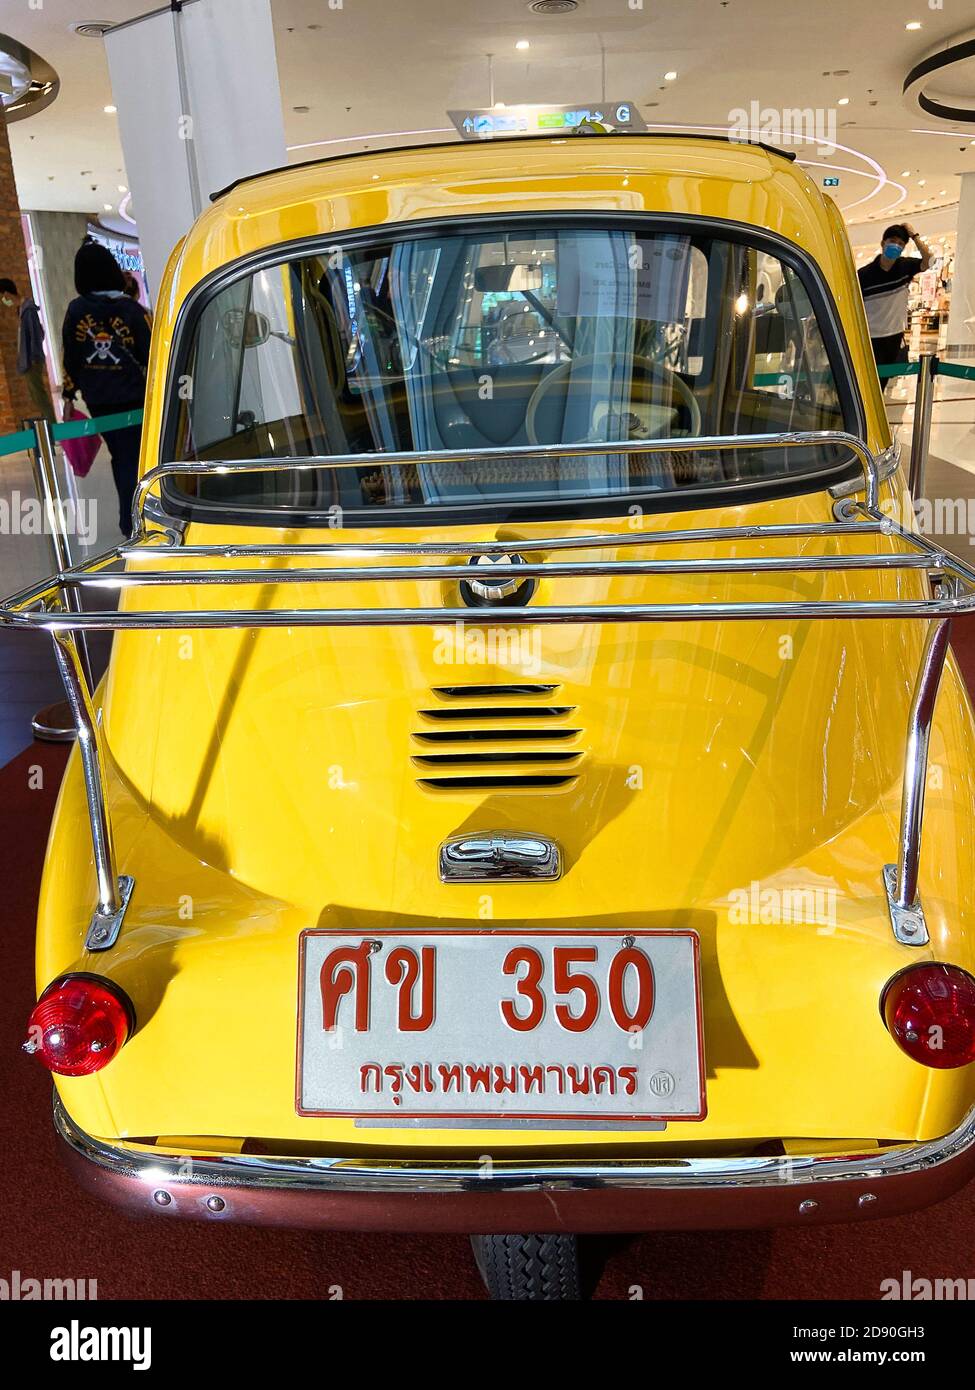 a small vehicle was manufactured in Germany and sold in Bangkok Thailand Stock Photo